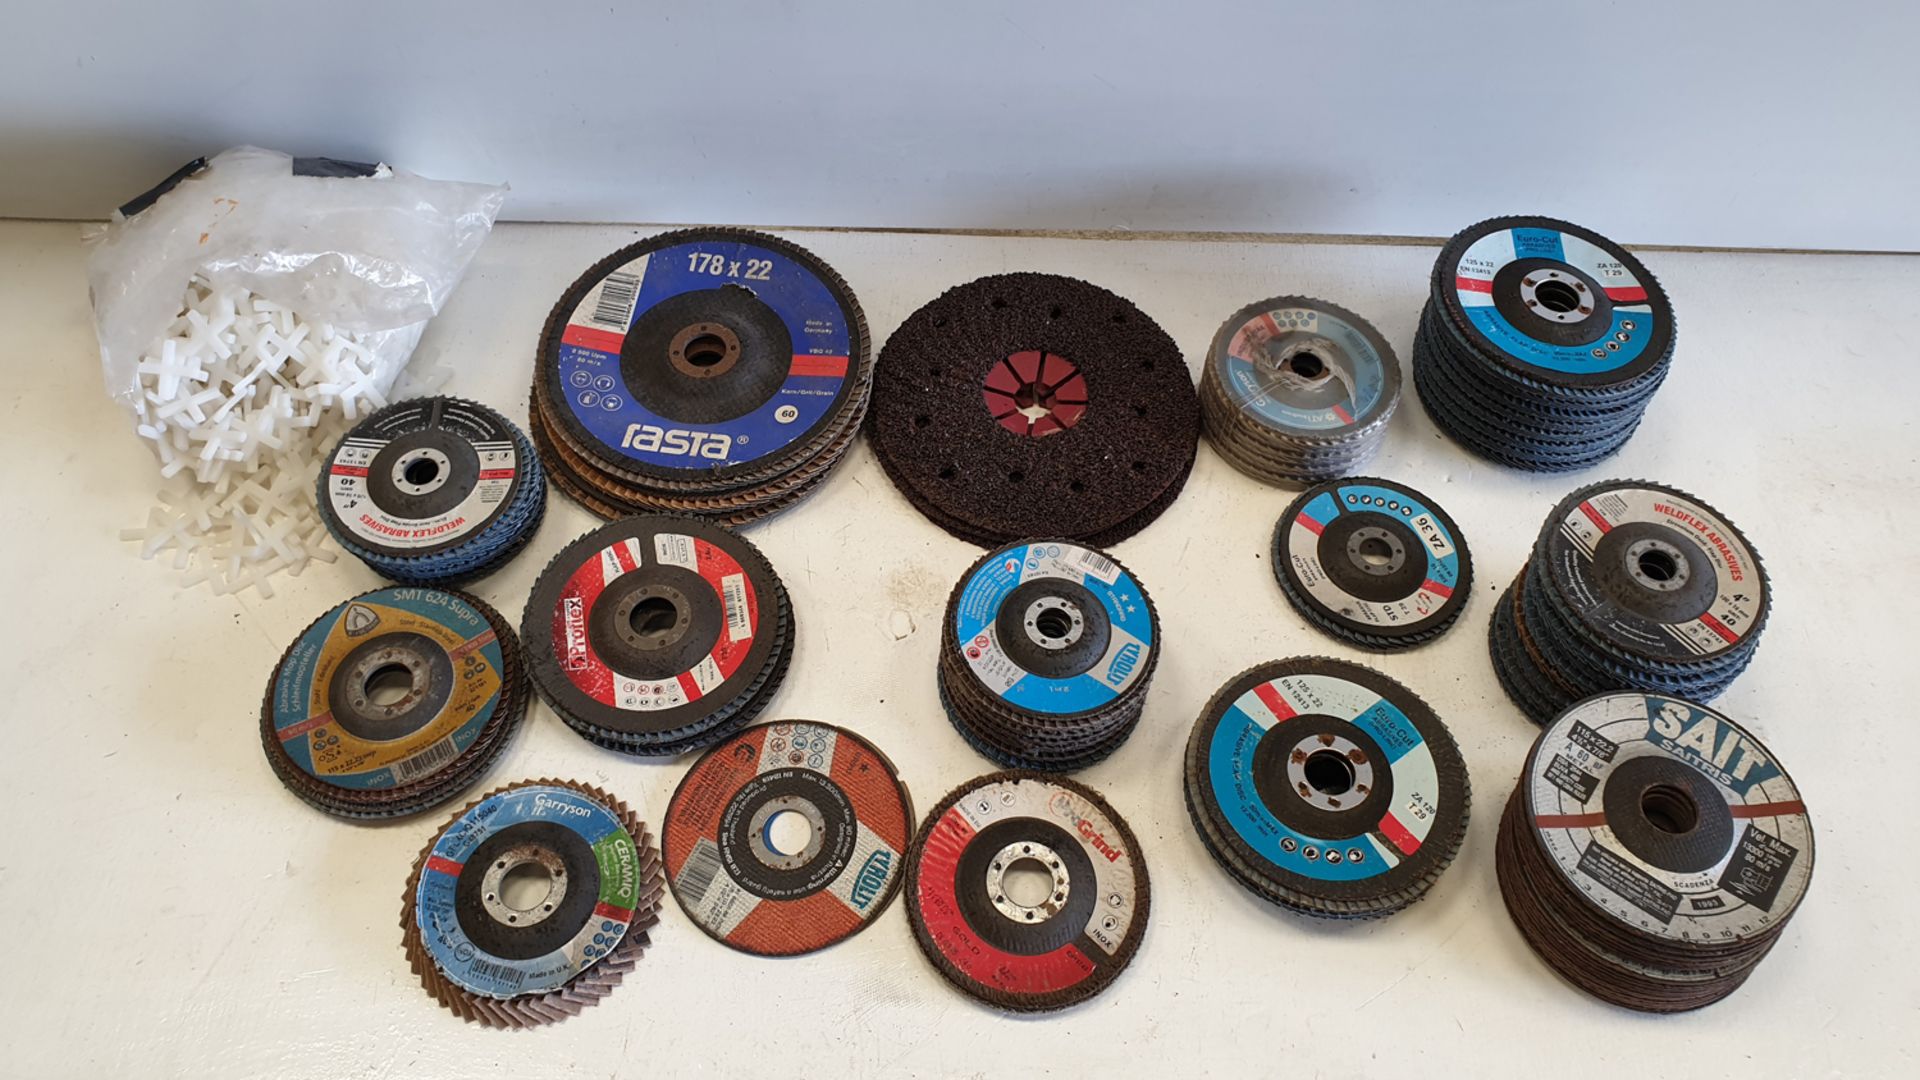 Quantity of Abbrasive Discs & Tile Spacers as Lotted. - Image 2 of 2